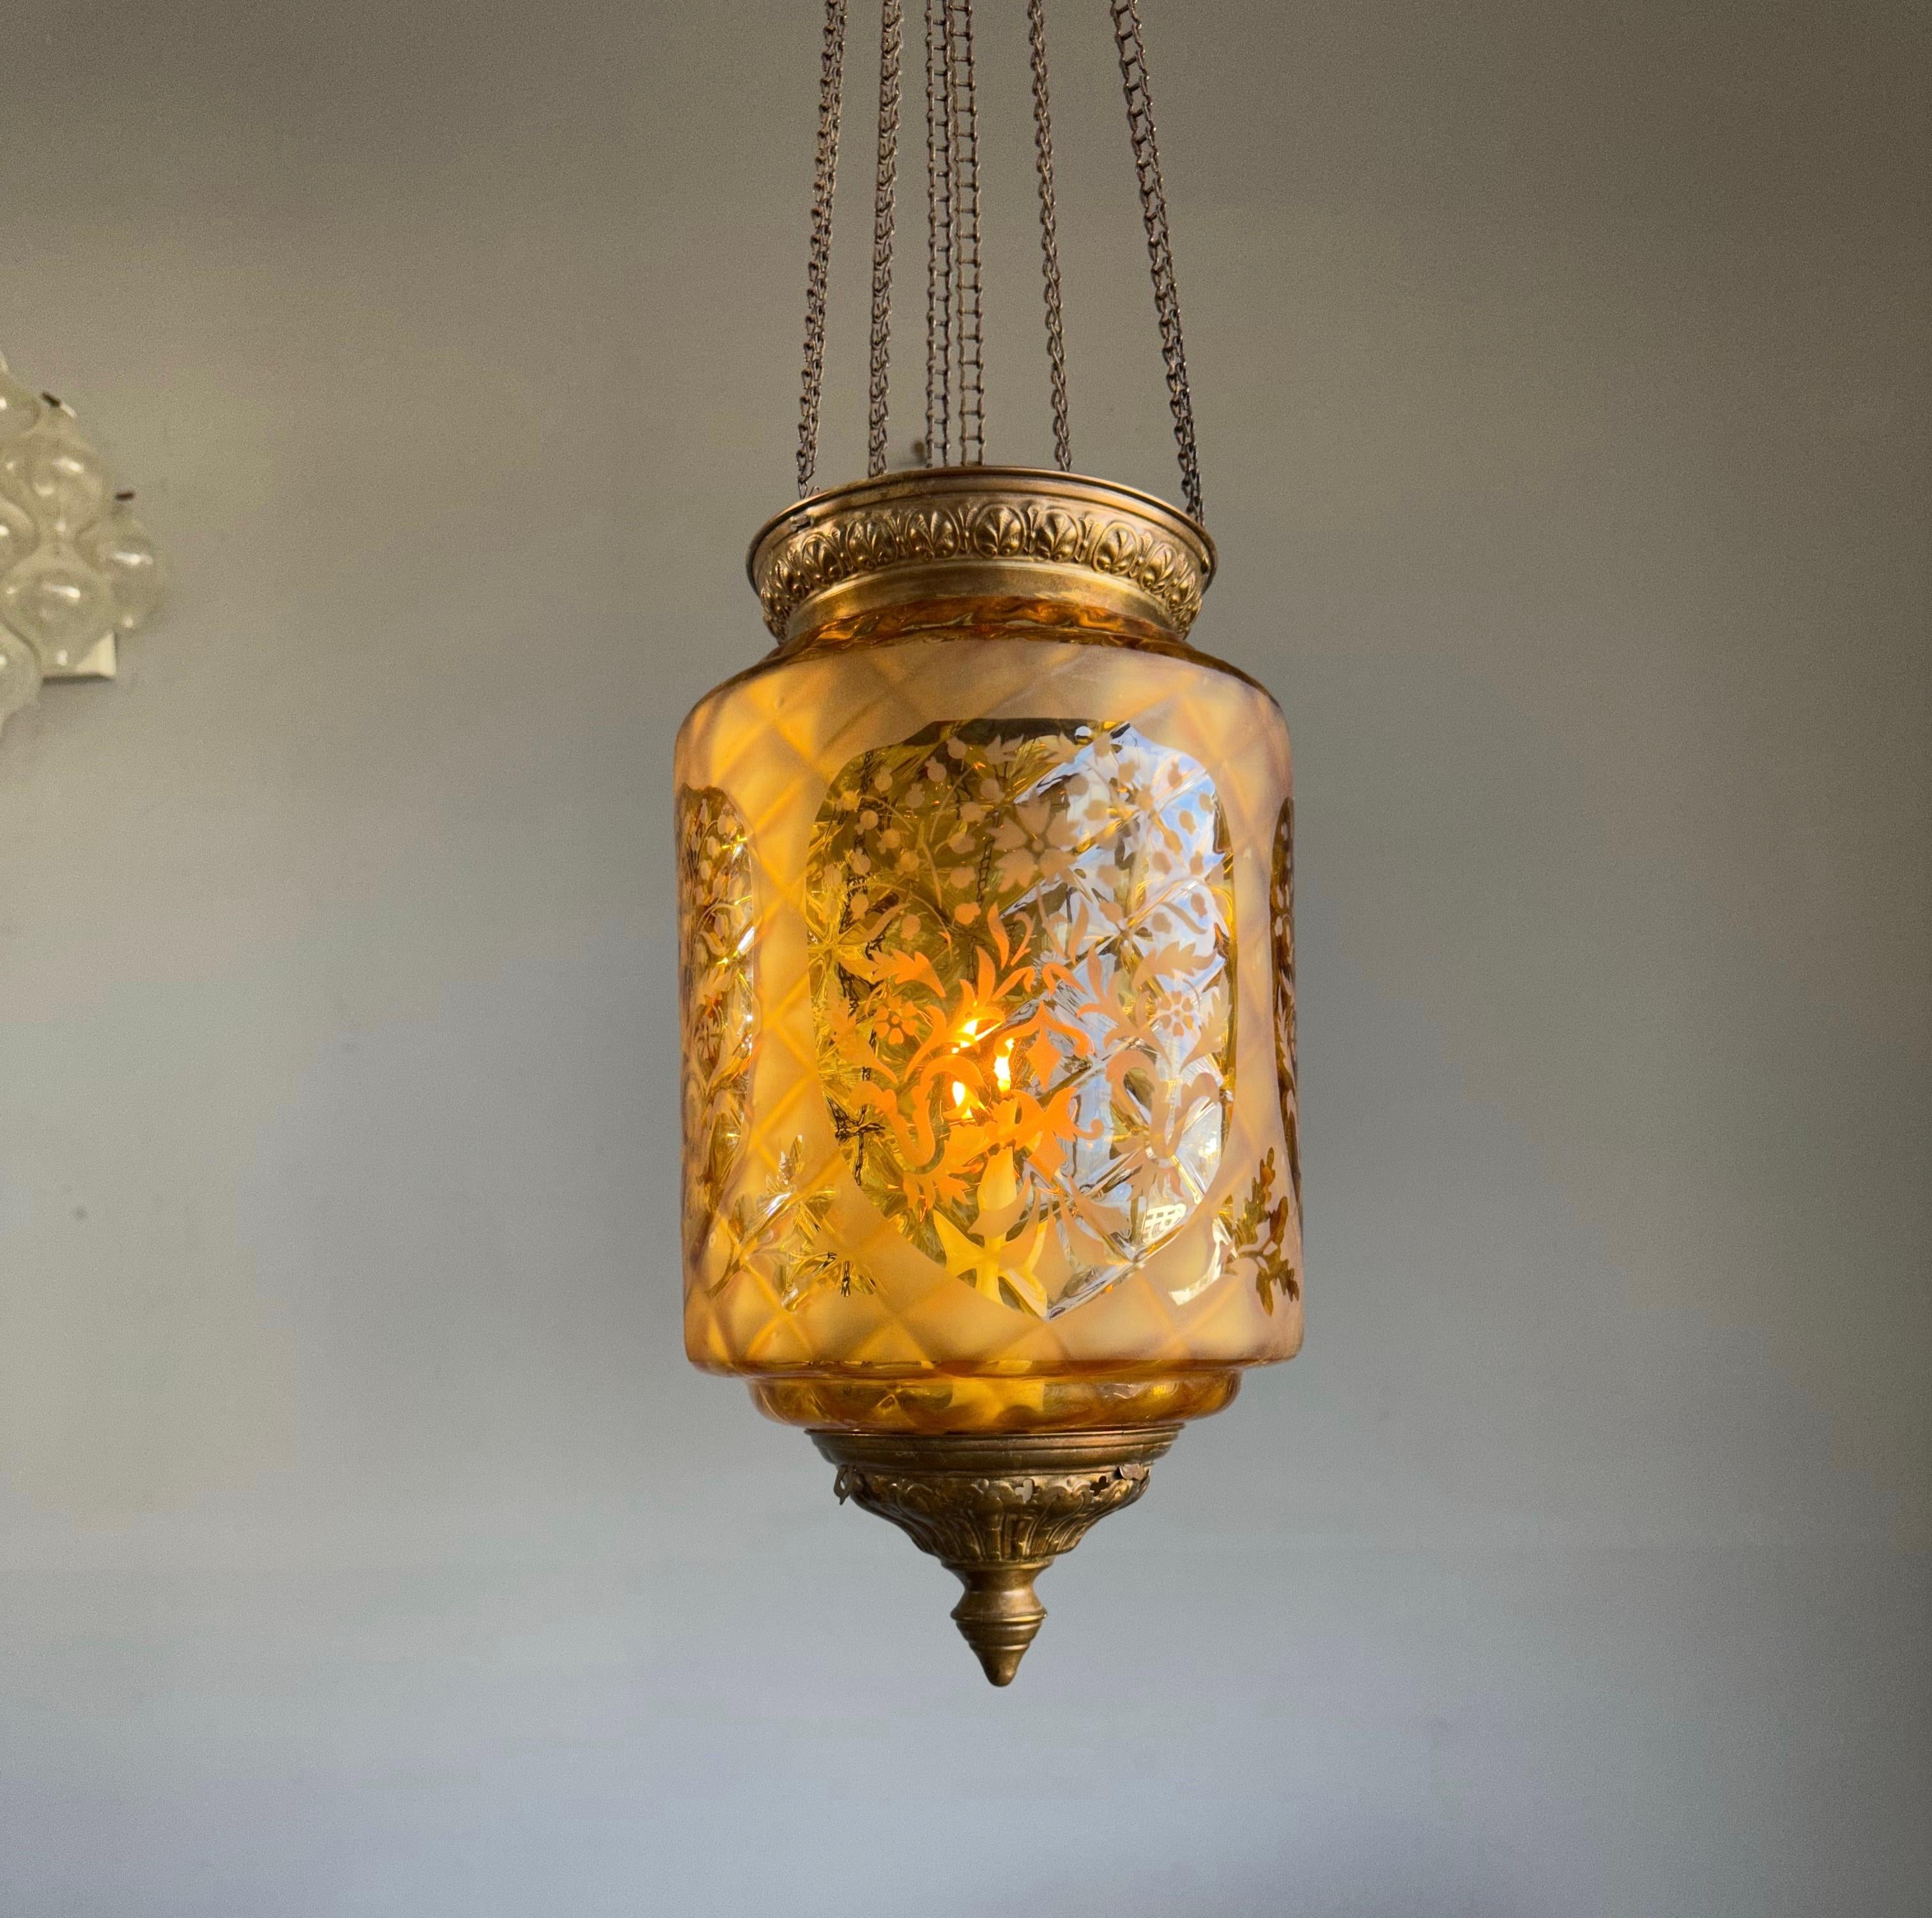 Etched Stunning Victorian Lighting Gothic Brass & Mouth Blown Art Glass Pendant Lantern For Sale